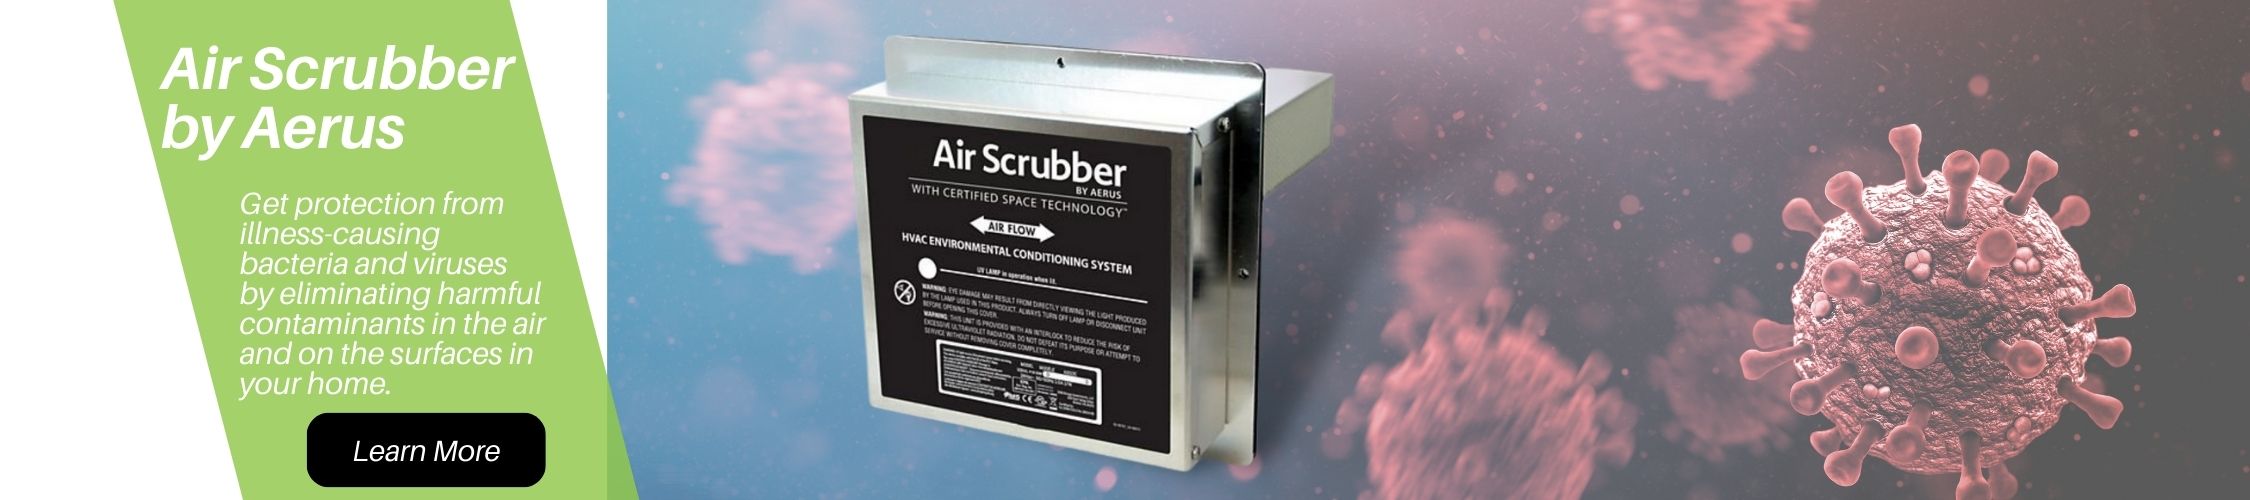 Fight viruses in your home with an Aerus Air Scrubber